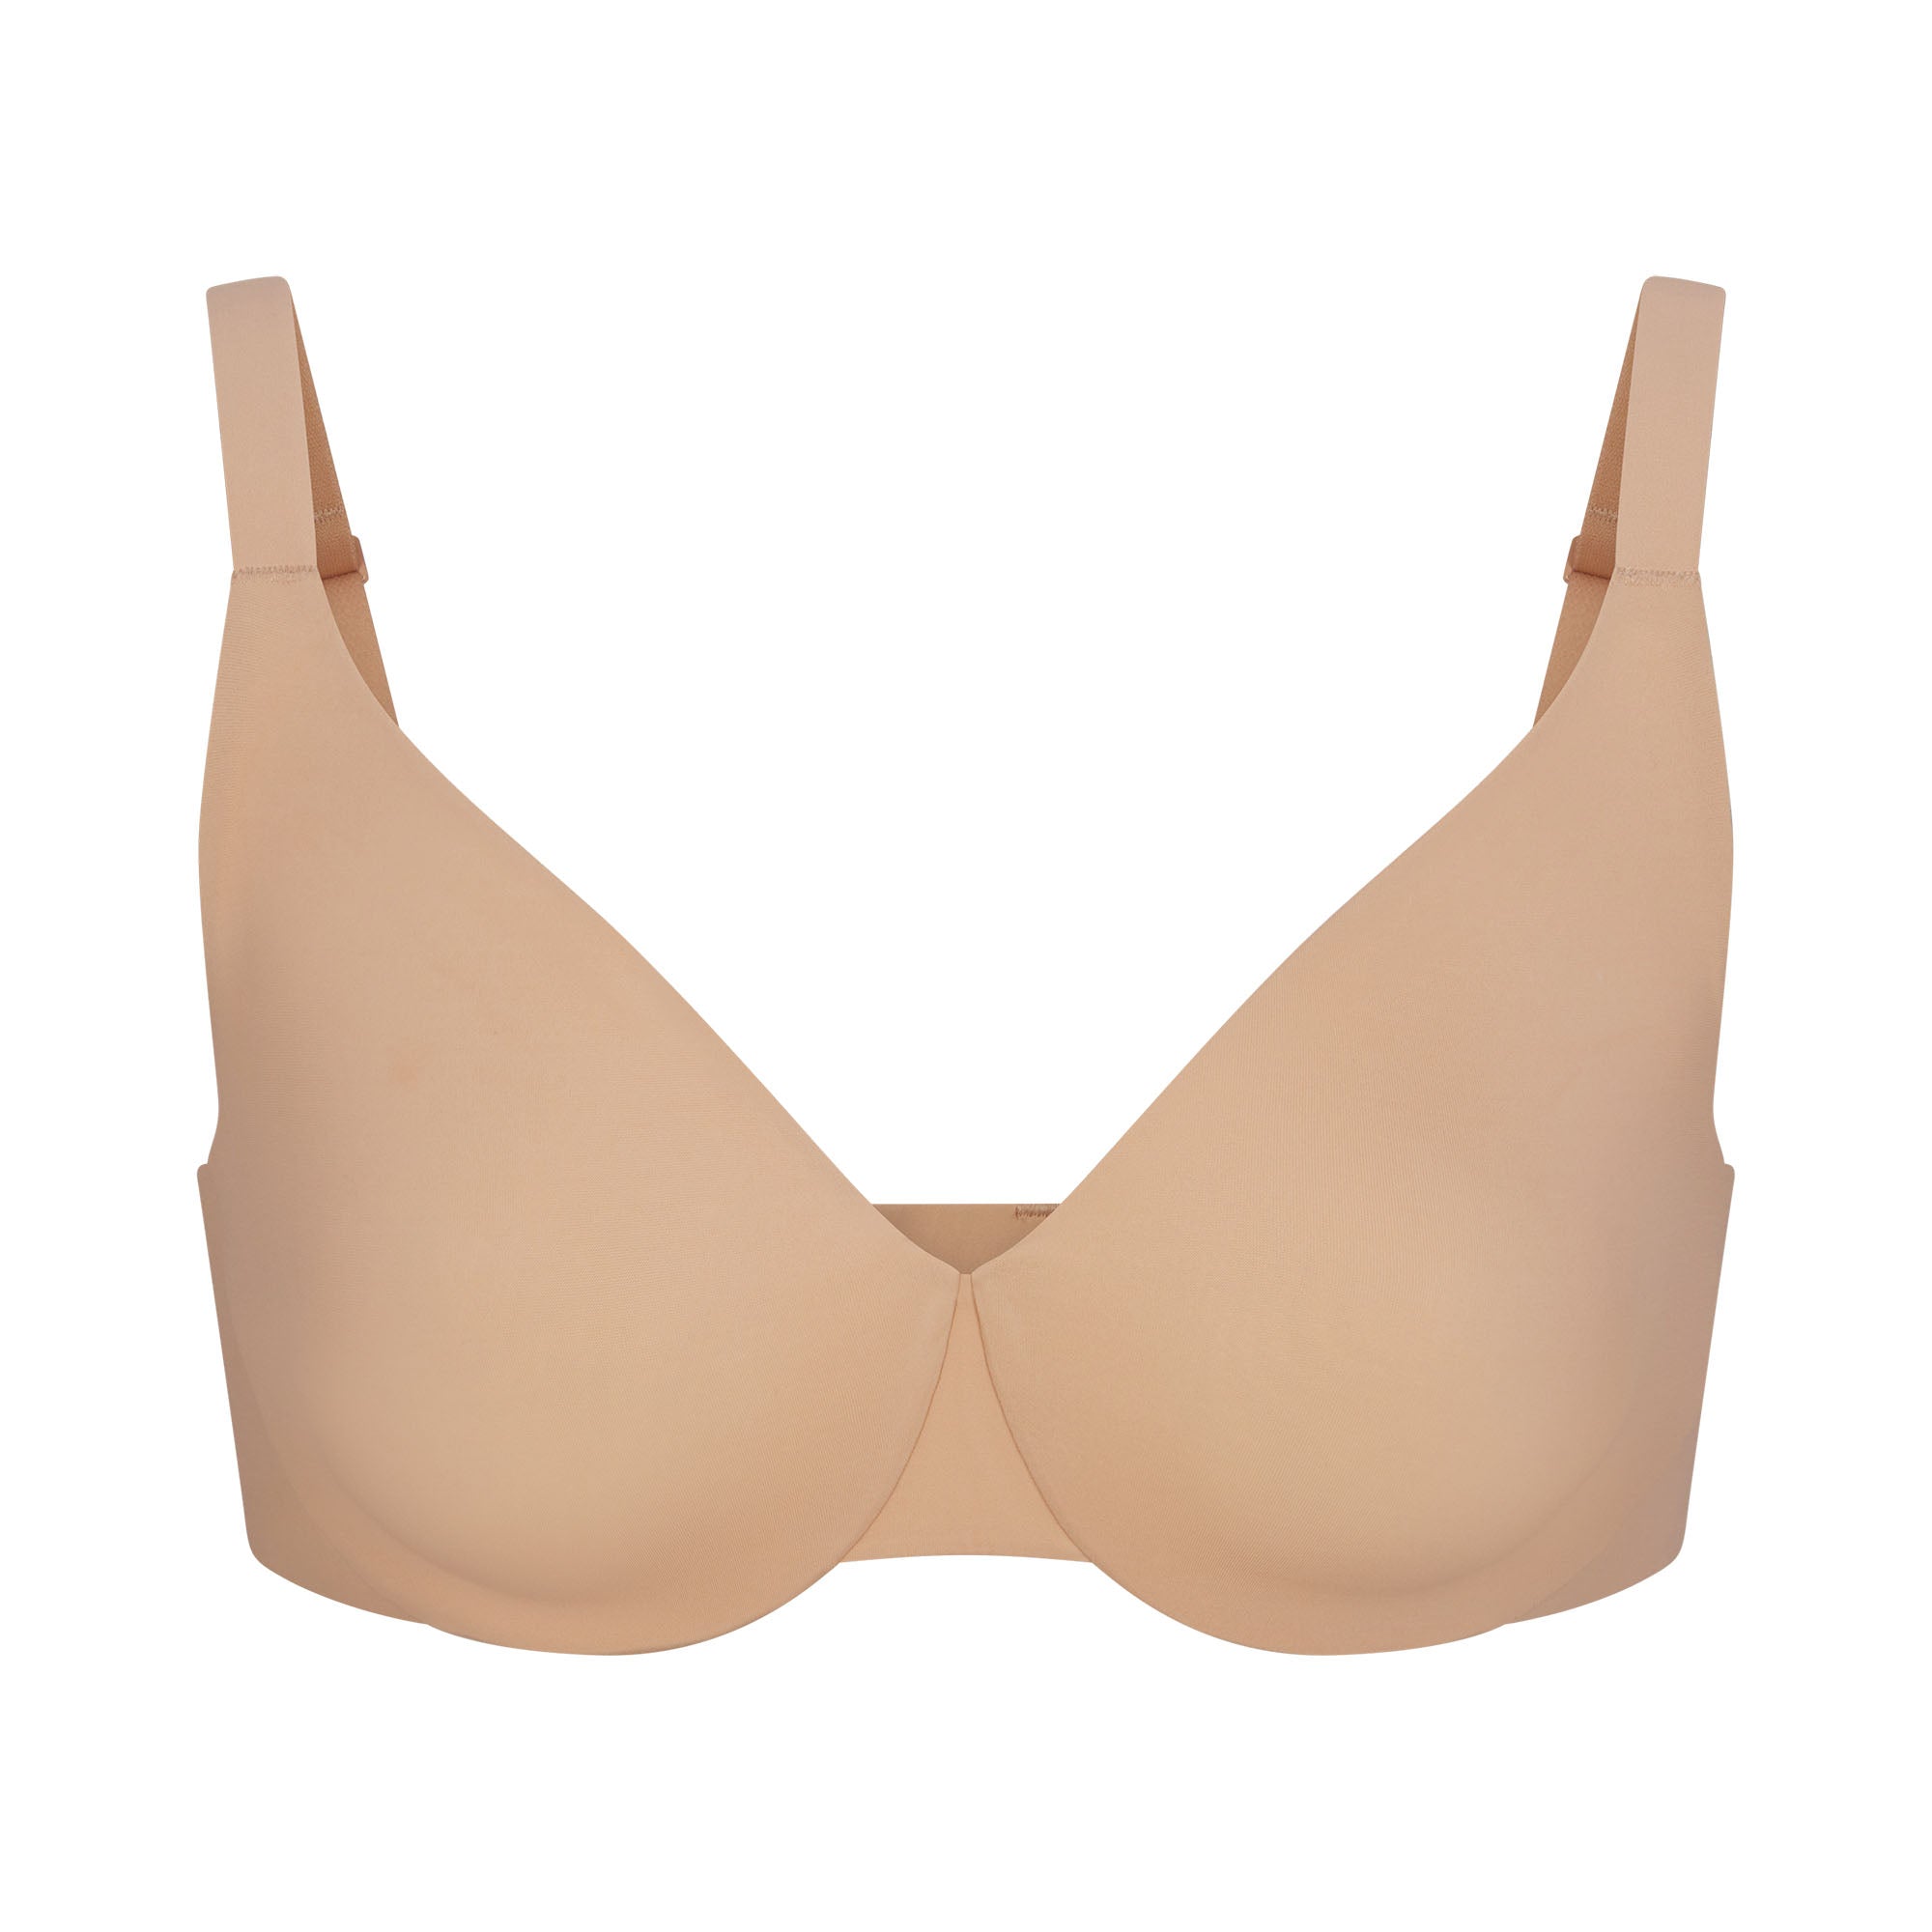 SKIMS Wireless Bra NWT 32C Tan Size 32 C - $30 (40% Off Retail) New With  Tags - From Ali